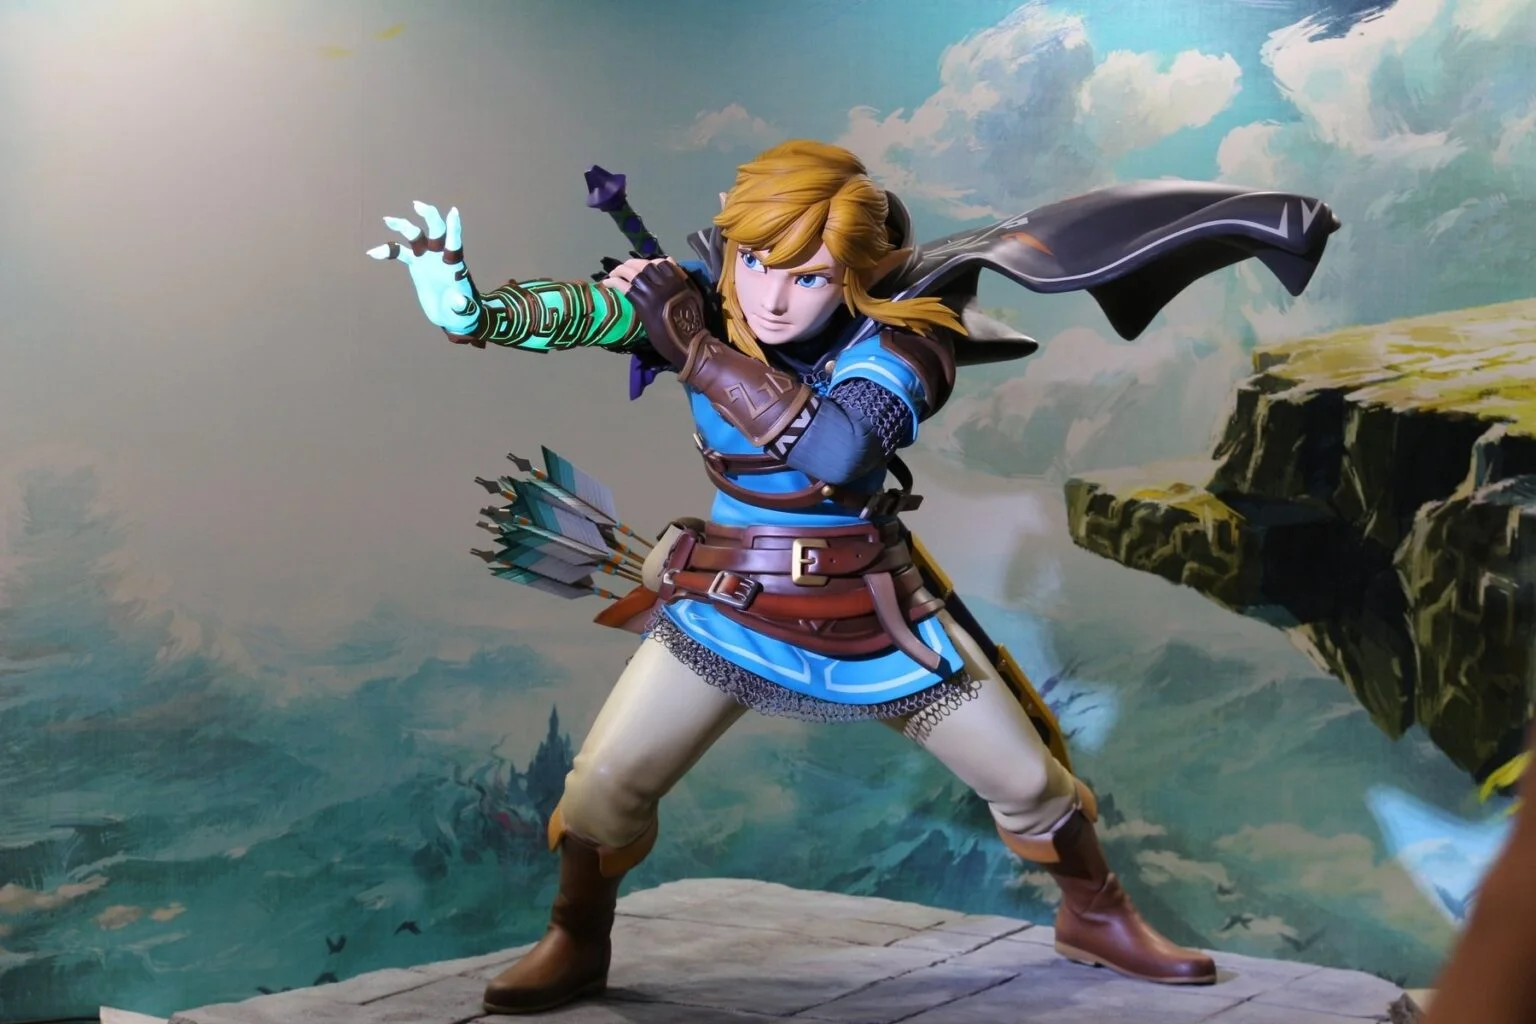 Critics were delighted with the new The Legend of Zelda